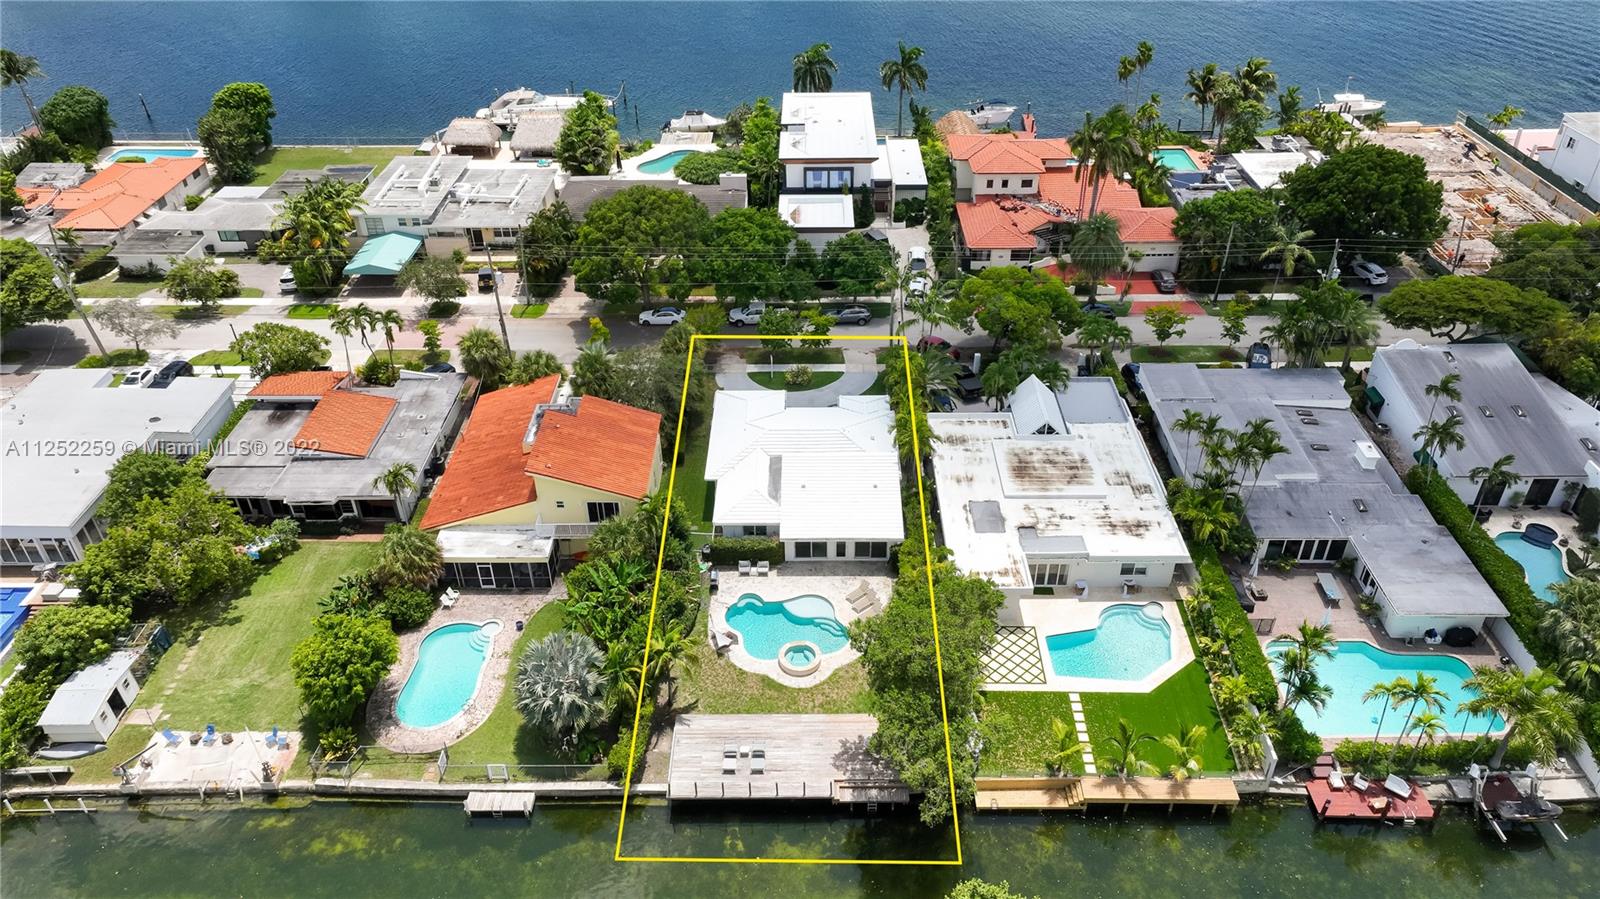 Beautiful Miami Beach property is located in the exclusive gated community of Biscayne Point. The home sits on 60’ of prime waterfront great for enjoying the waterways via paddle boards, kayaks, jet skis or small boat. Ocean access with one fixed bridge. The oversized 150’ deep lot allows for a great backyard entertaining with a large heated pool, built-in hot tub and lush tropical landscaping. A new dock and decking was installed in 2017.  High vaulted ceilings and newer hurricane impact windows allow natural to flow through the house. The open-concept living area and four bedrooms creates a highly desirable floor plan. There are natural oak and porcelain floors throughout. The kitchen has granite countertops and modern stainless steel appliances.